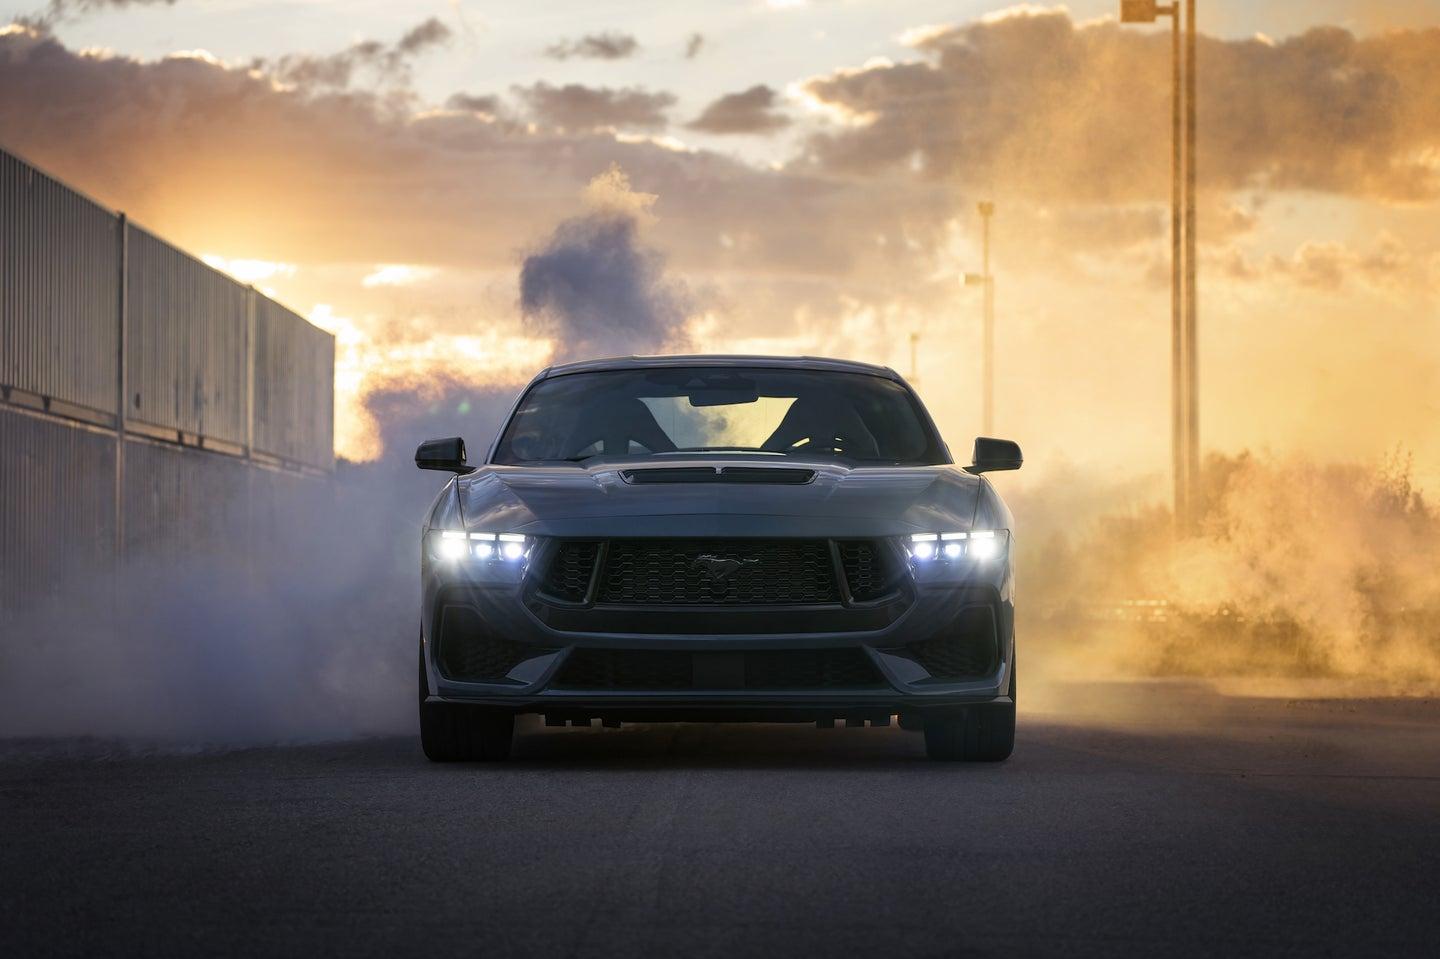 Take A Look At The Tech In Ford Mustang Popular Science